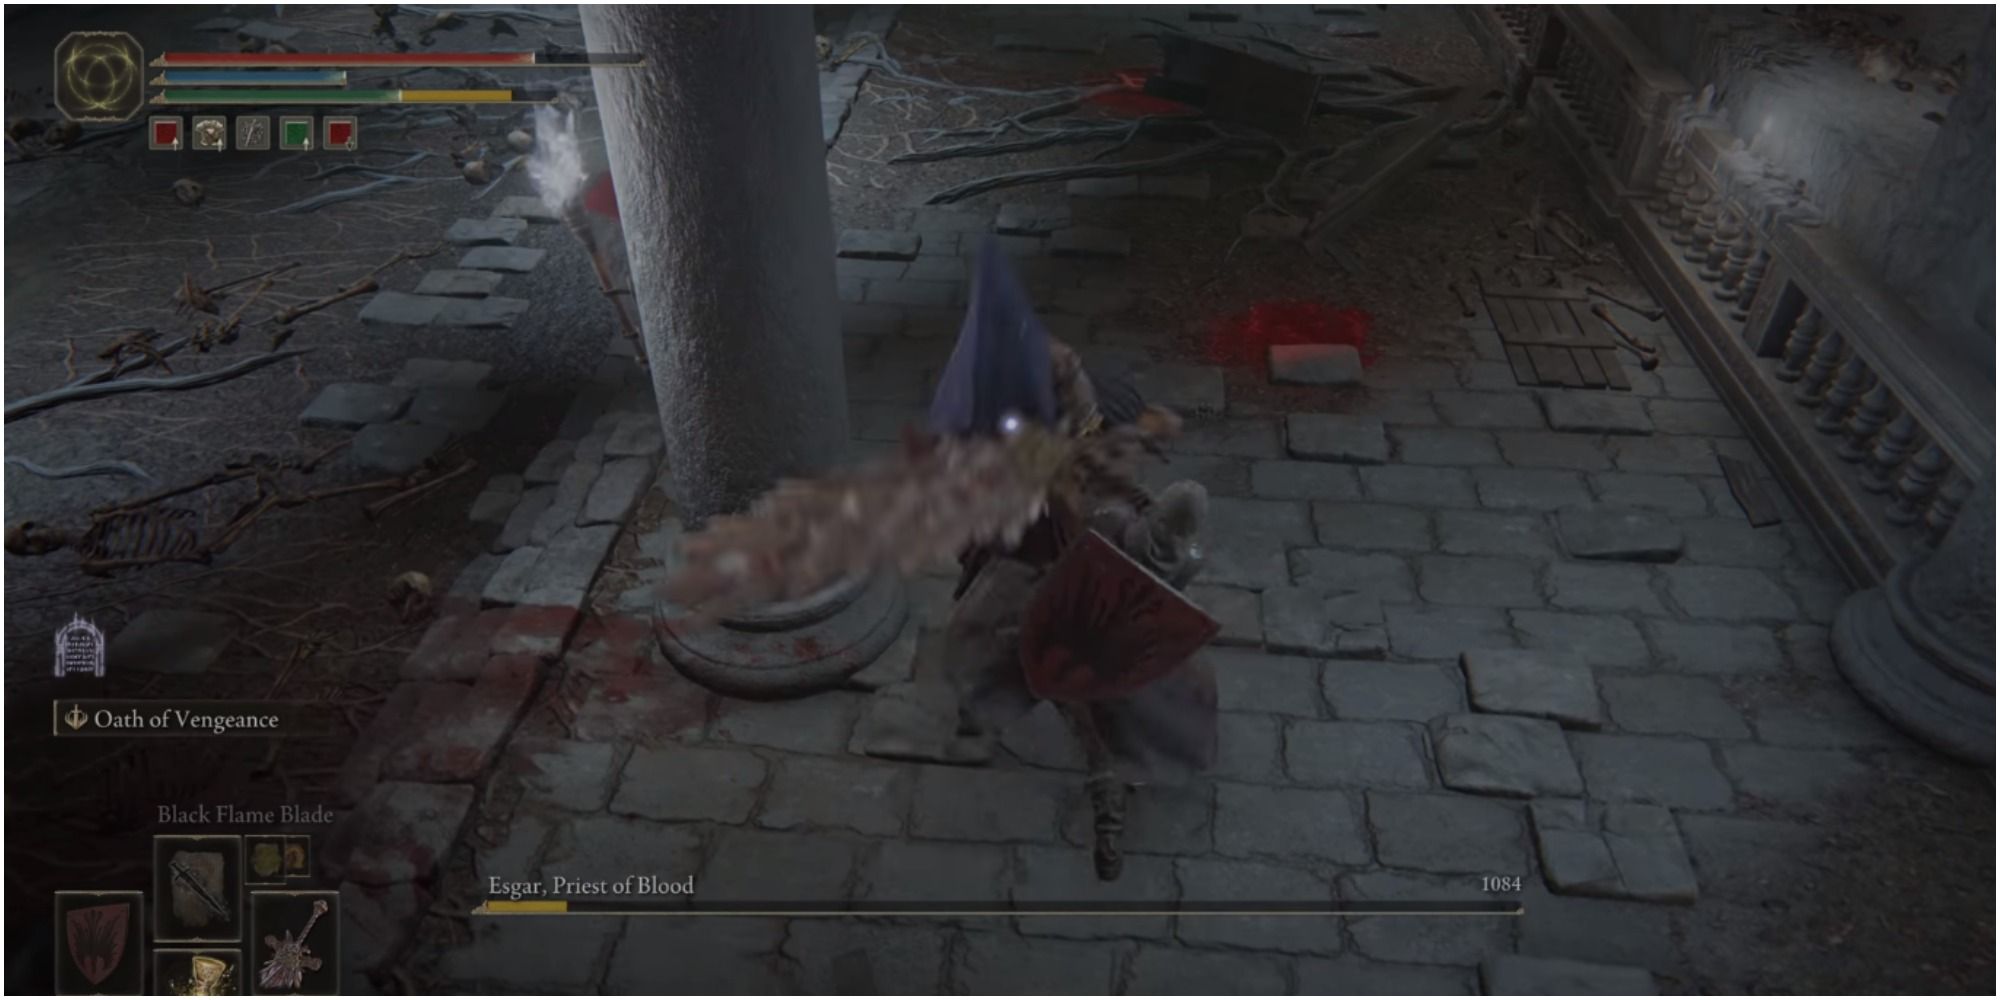 The player approaching the boss with their weapon.